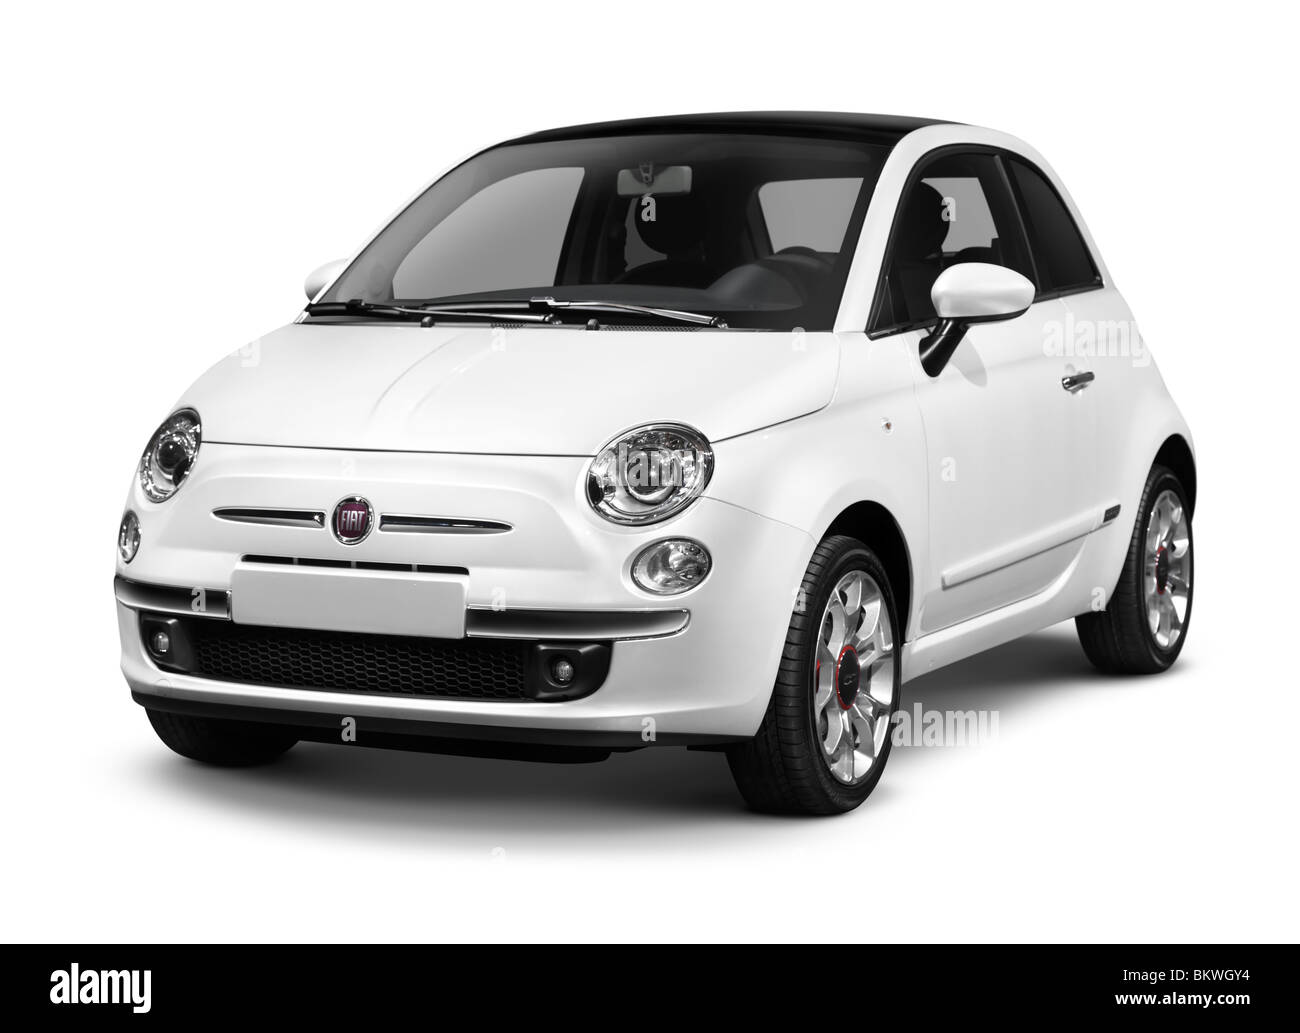 License available at MaximImages.com - Fiat Nuova 500 small city car isolated on white background with clipping path Stock Photo